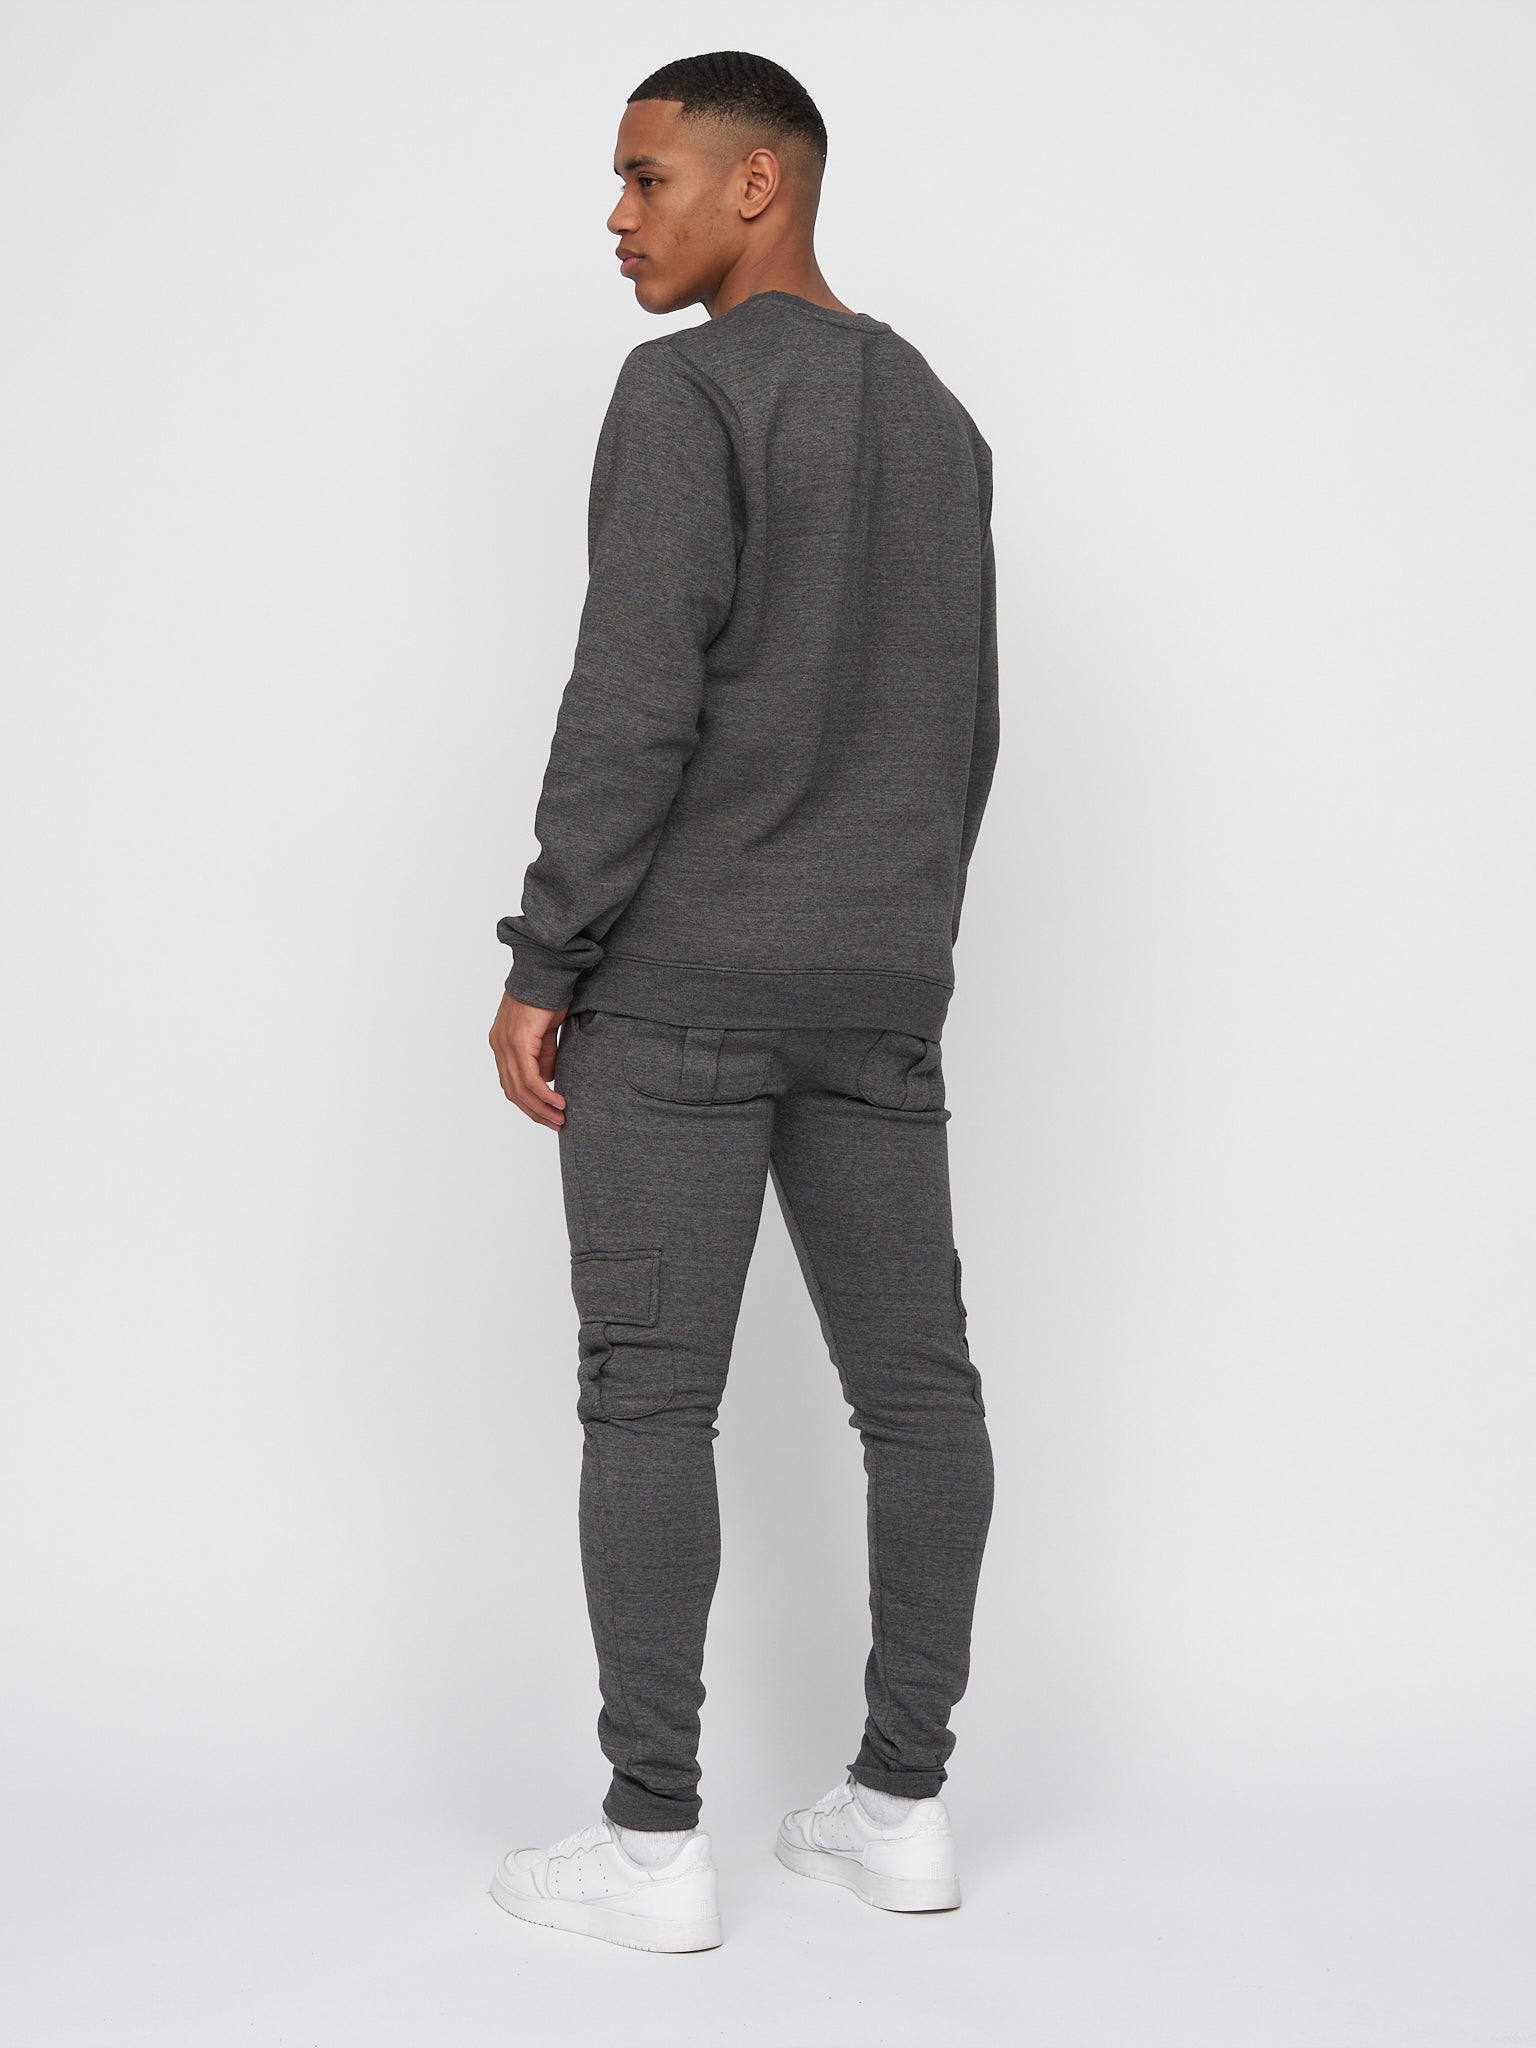 Melbray Crew Sweat & Jogger Set Charcoal Marl – Duck and Cover